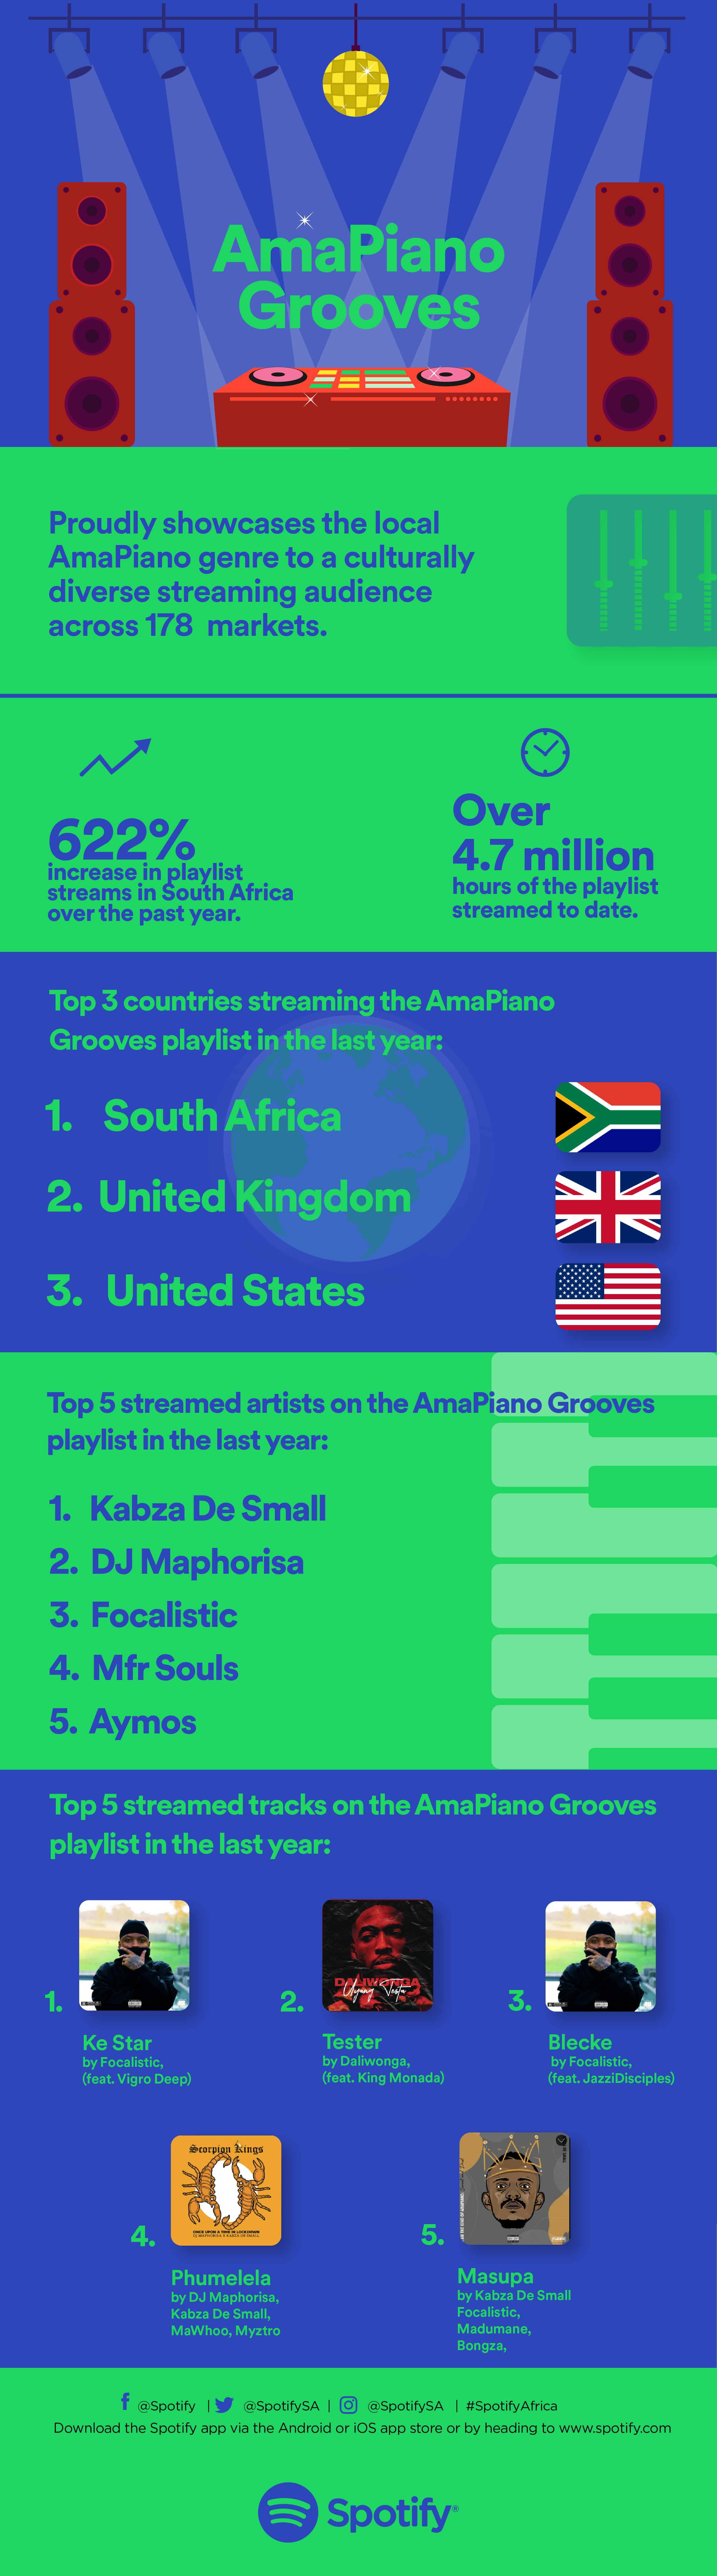 Spotify’s Amapiano Grooves Playlist Drives The Genre’s Global Success 2